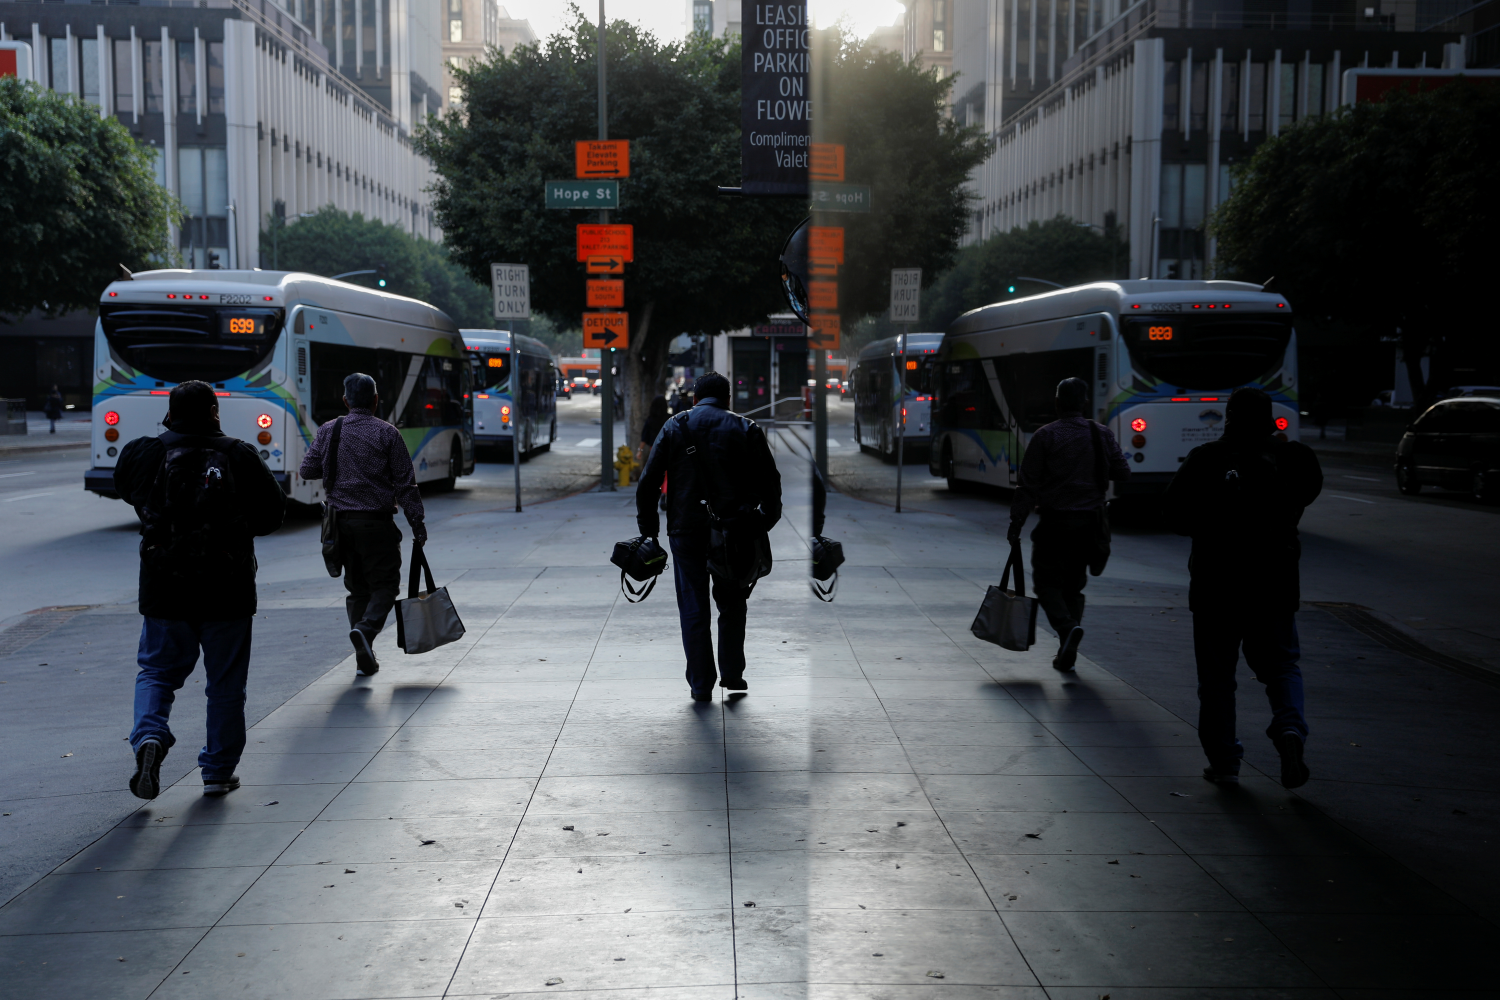 Commuters make their way to work after departing a city bus in downtown Los Angeles, California, U.S., October 24, 2018. REUTERS/Mike Blake